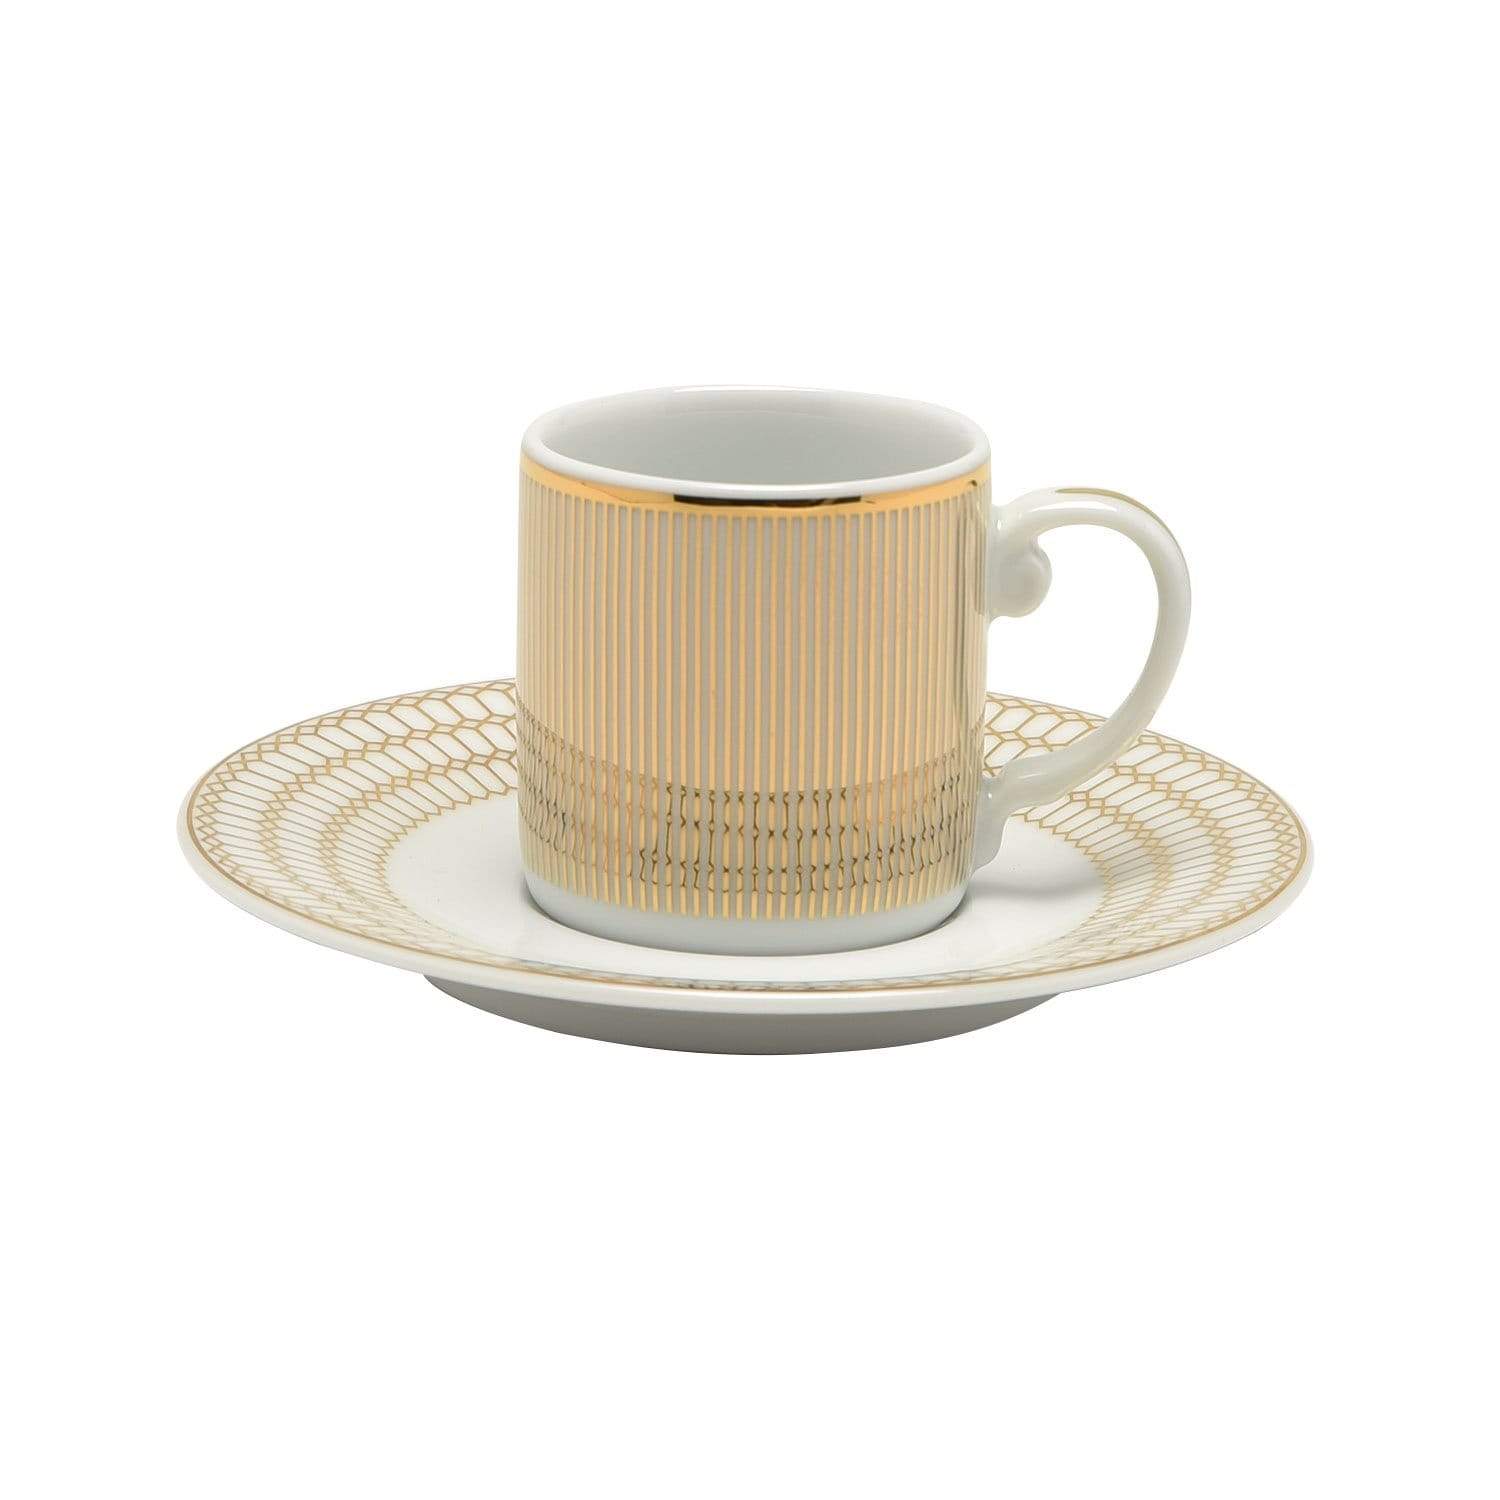 DANKOTUWA FOSTER GOLD 6+6 DEMITASSE COFFEE CUP AND SAUCER - FOST-11792/693/6-G